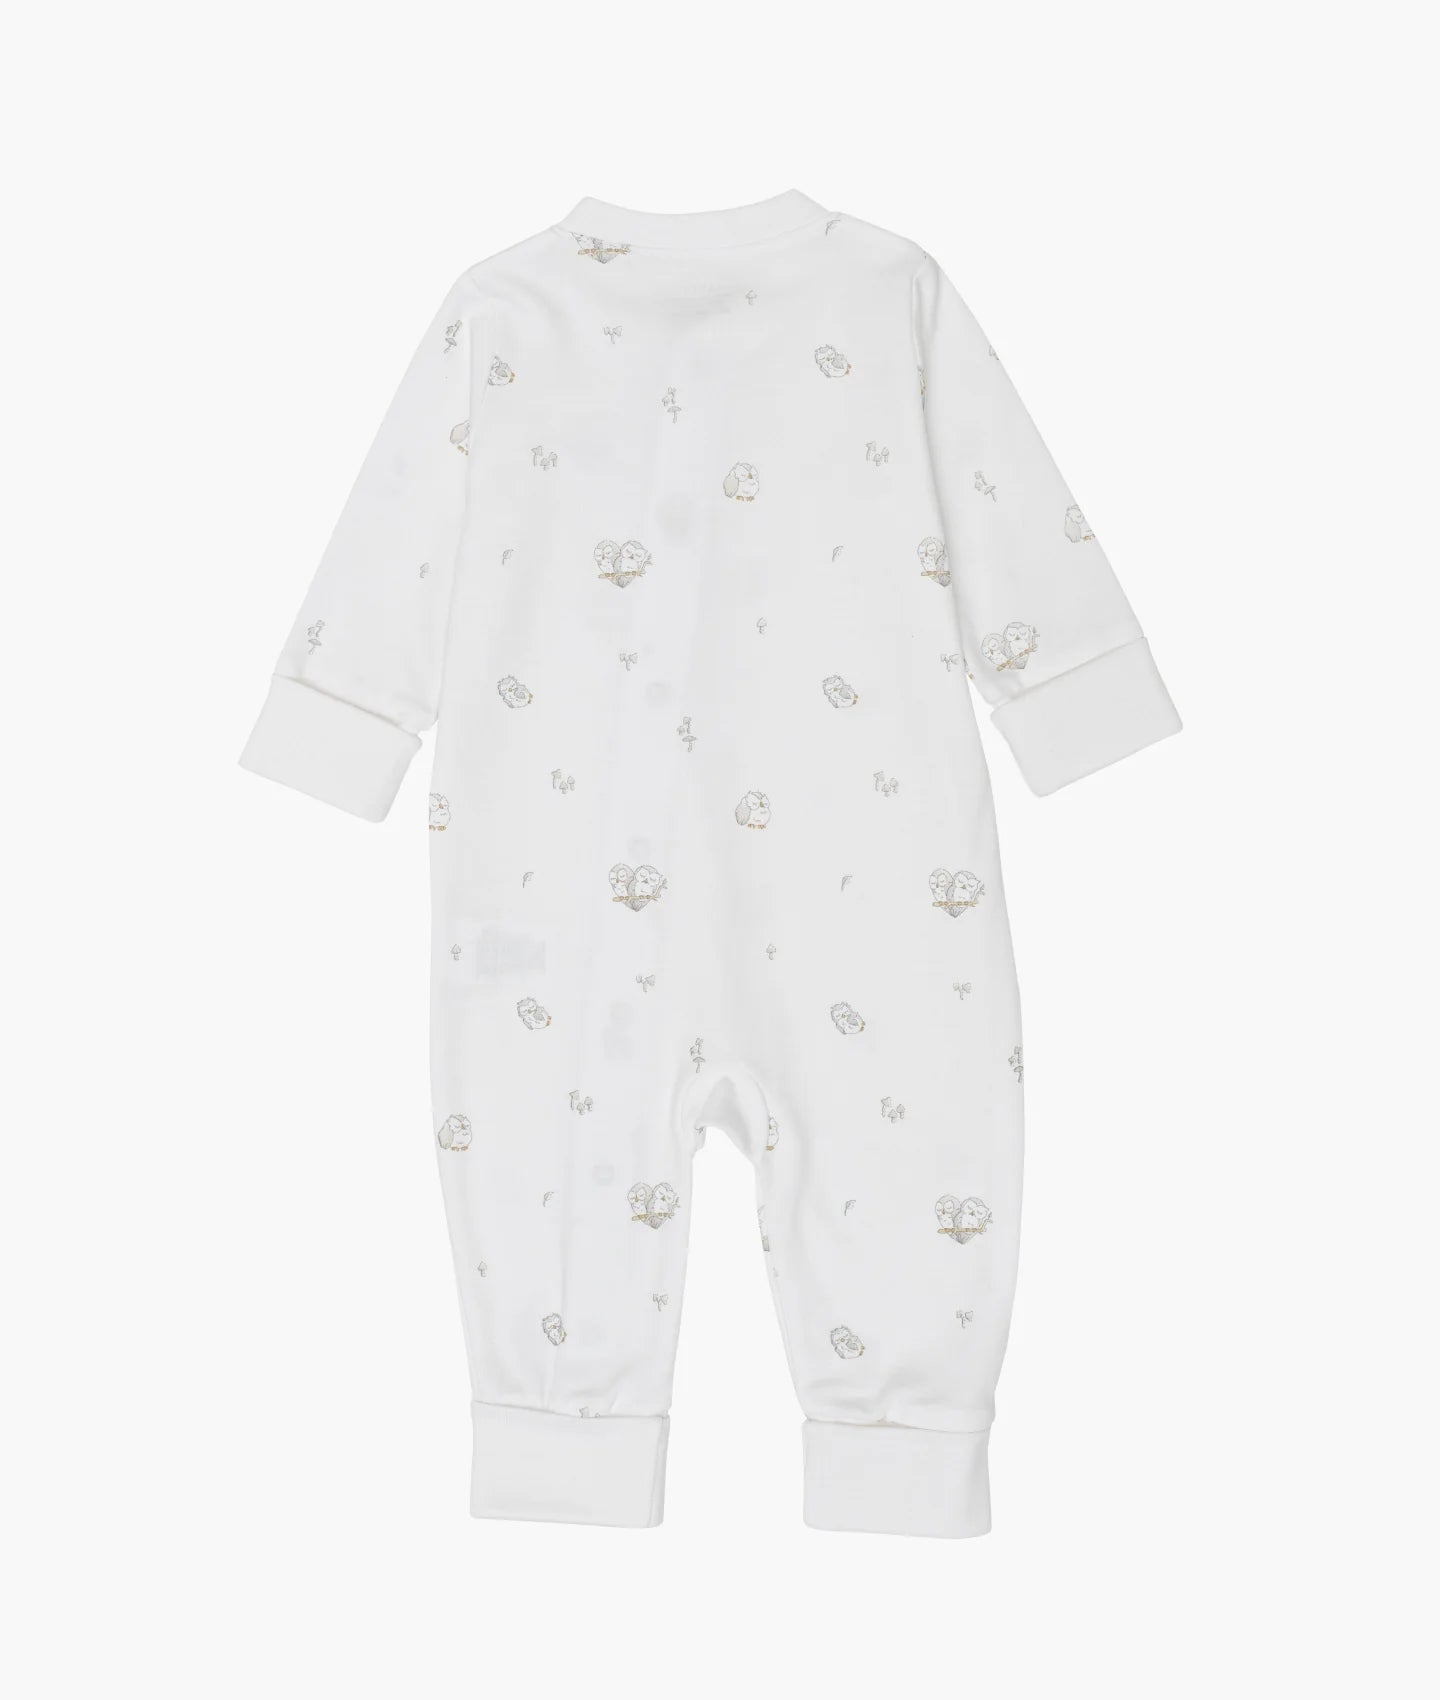 LIVLY Owls Overall